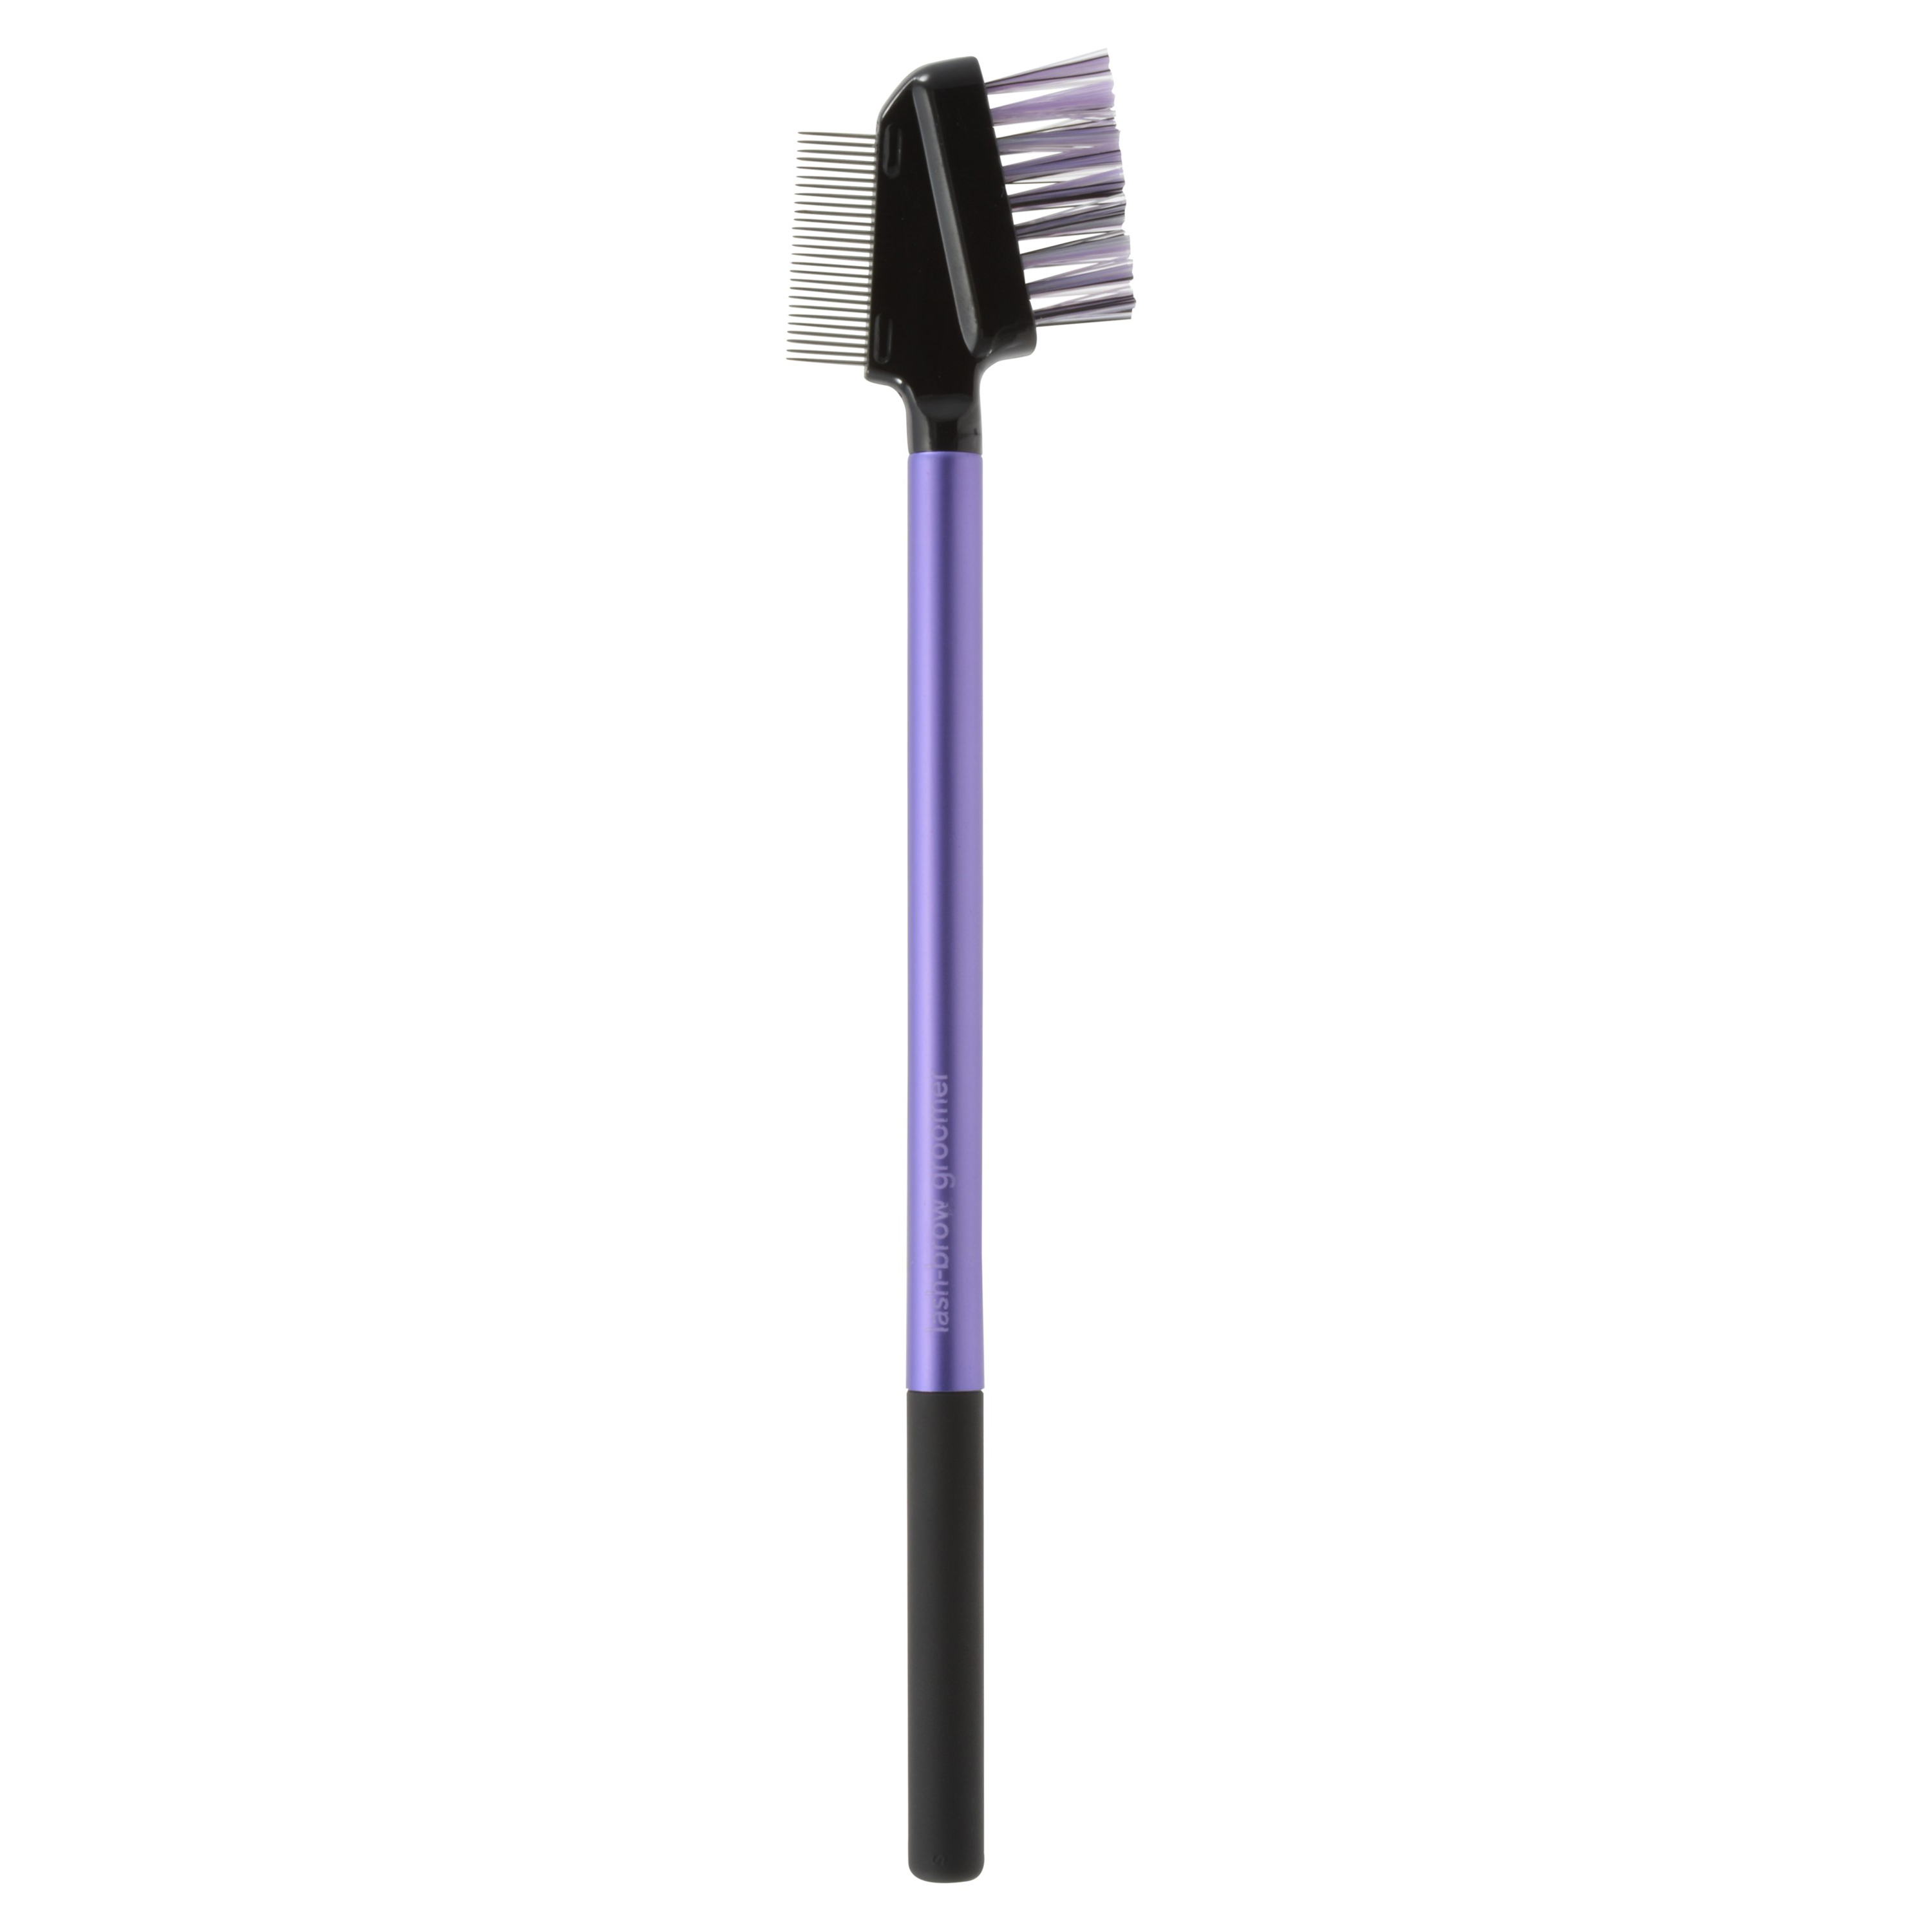 Real Techniques® Lash & Brow Grooming Makeup Brush, Single - image 1 of 2